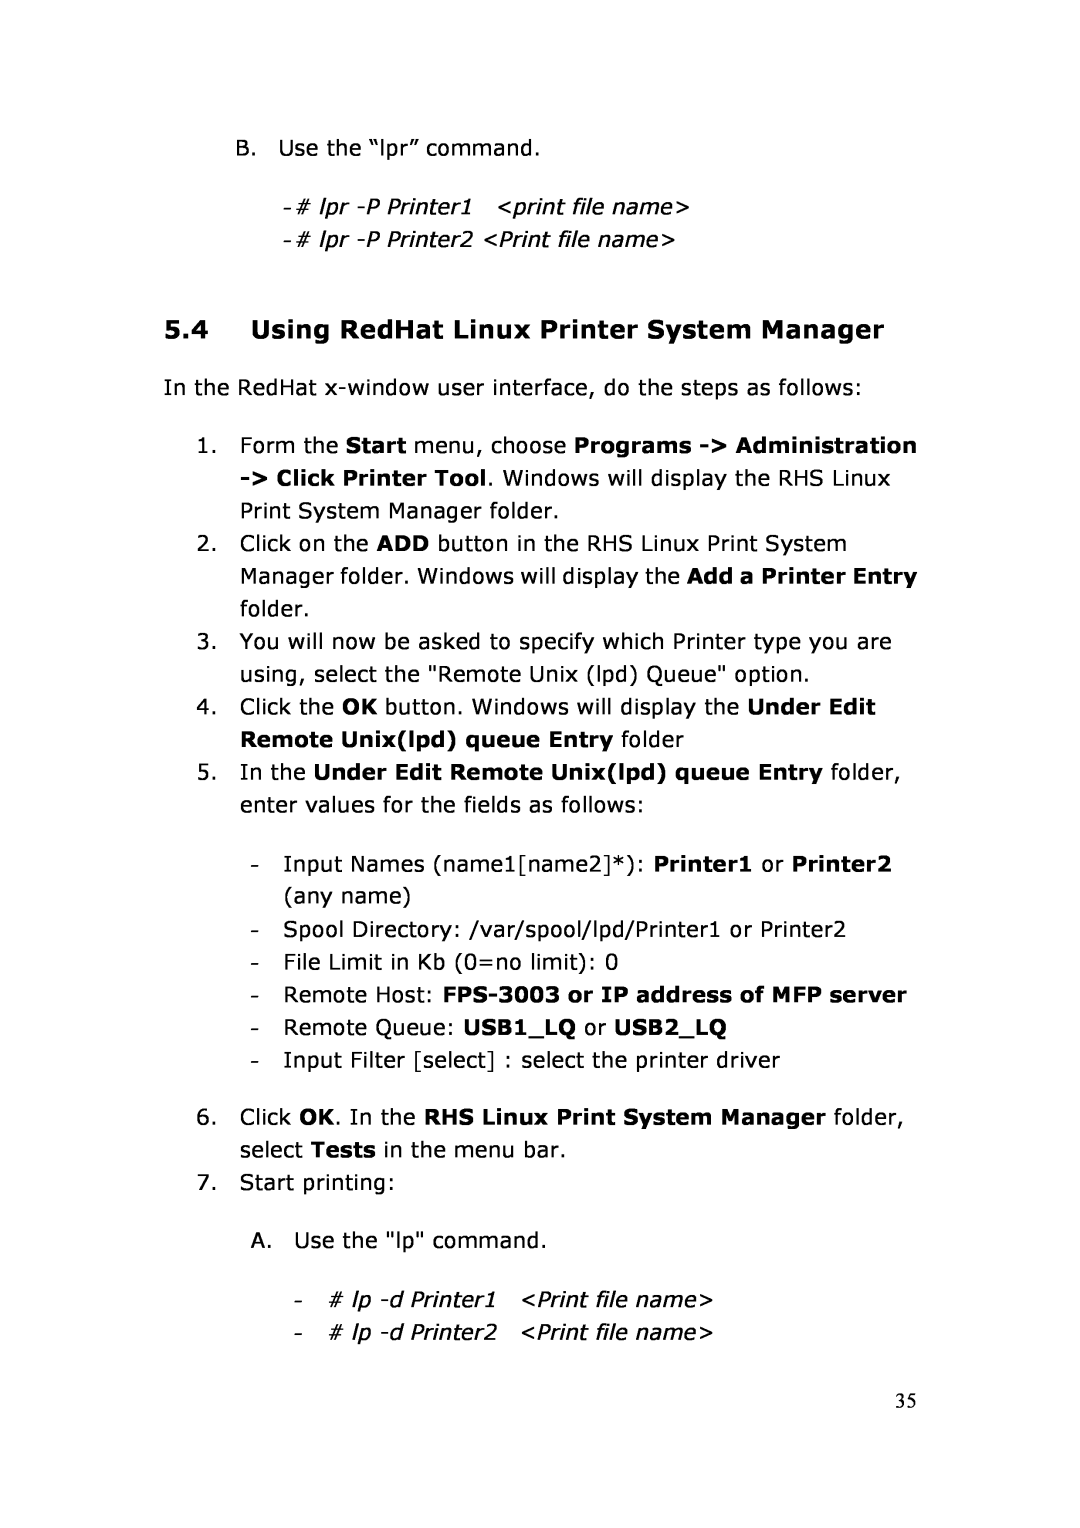 LevelOne user manual Using RedHat Linux Printer System Manager, Remote Host FPS-3003 or IP address of MFP server 